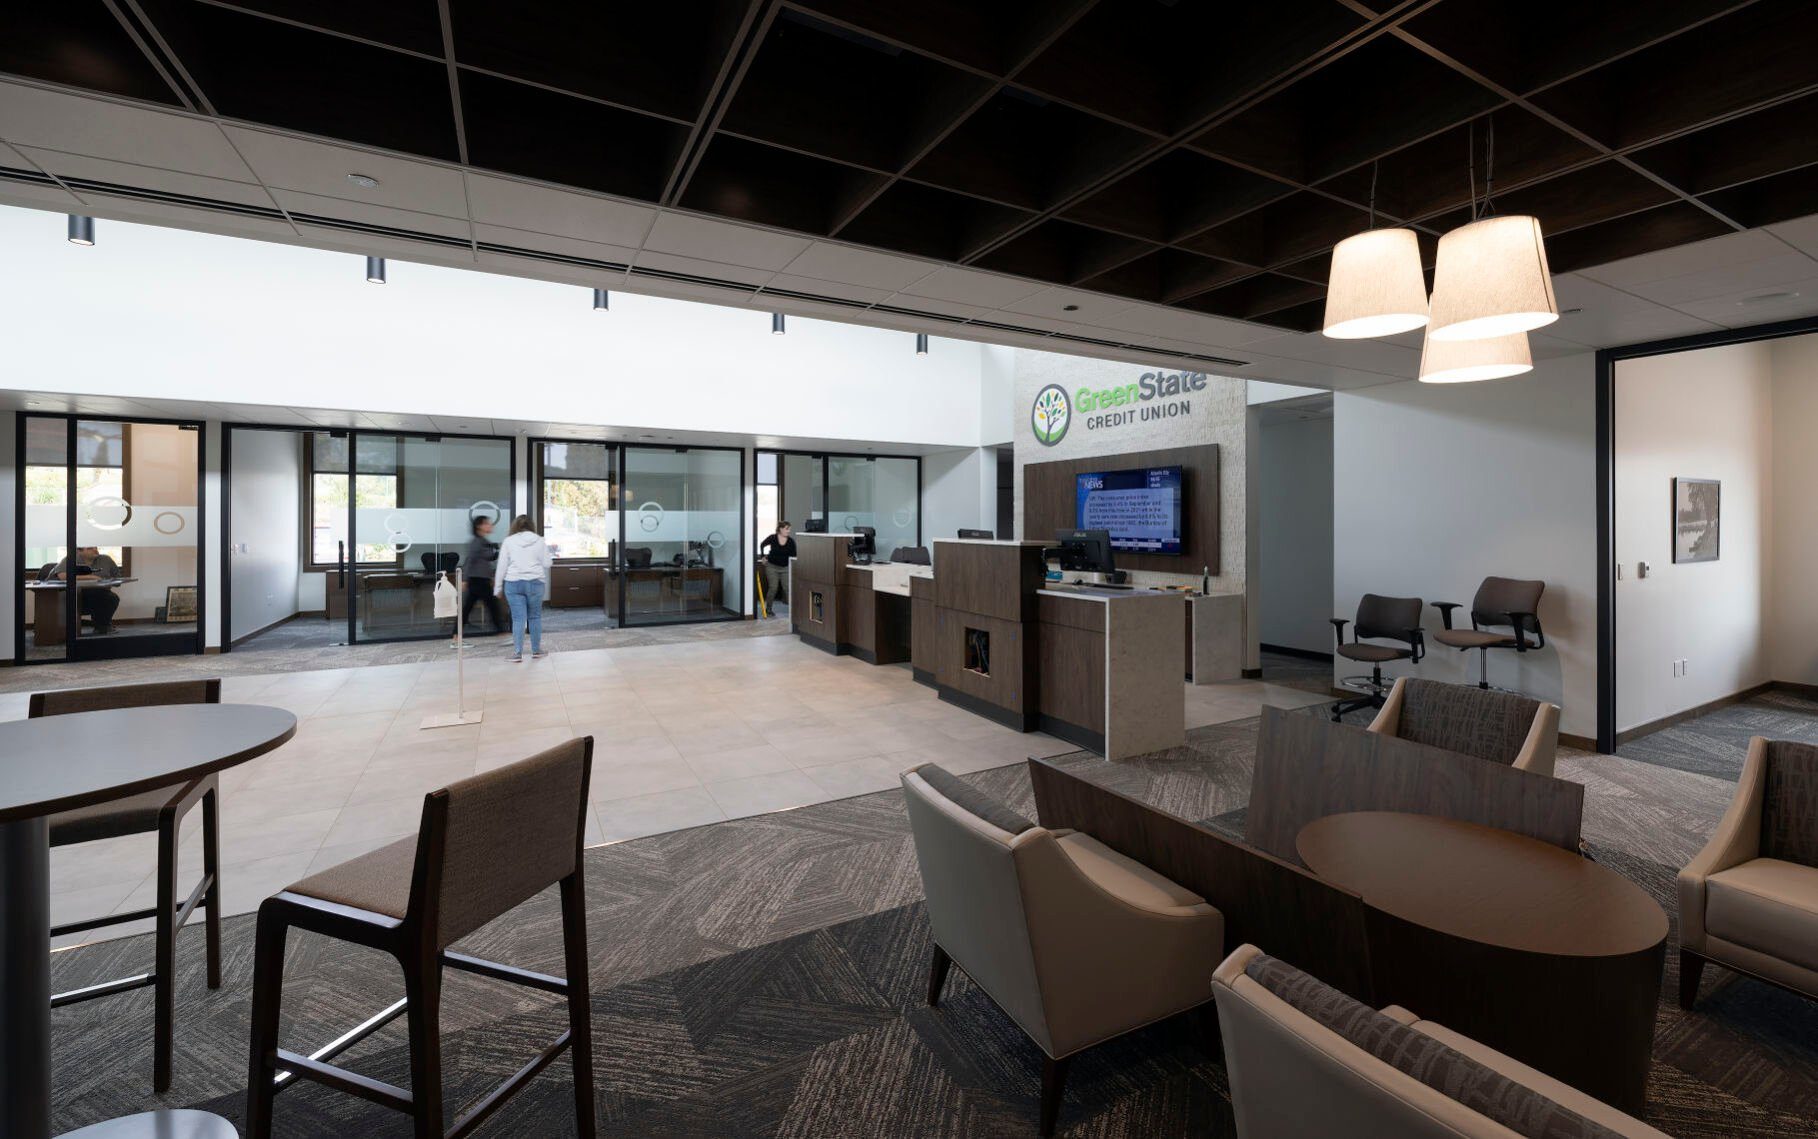 Interior of the new GreenState Credit Union branch on Stoneman Road in Dubuque.    PHOTO CREDIT: Stephen Gassman